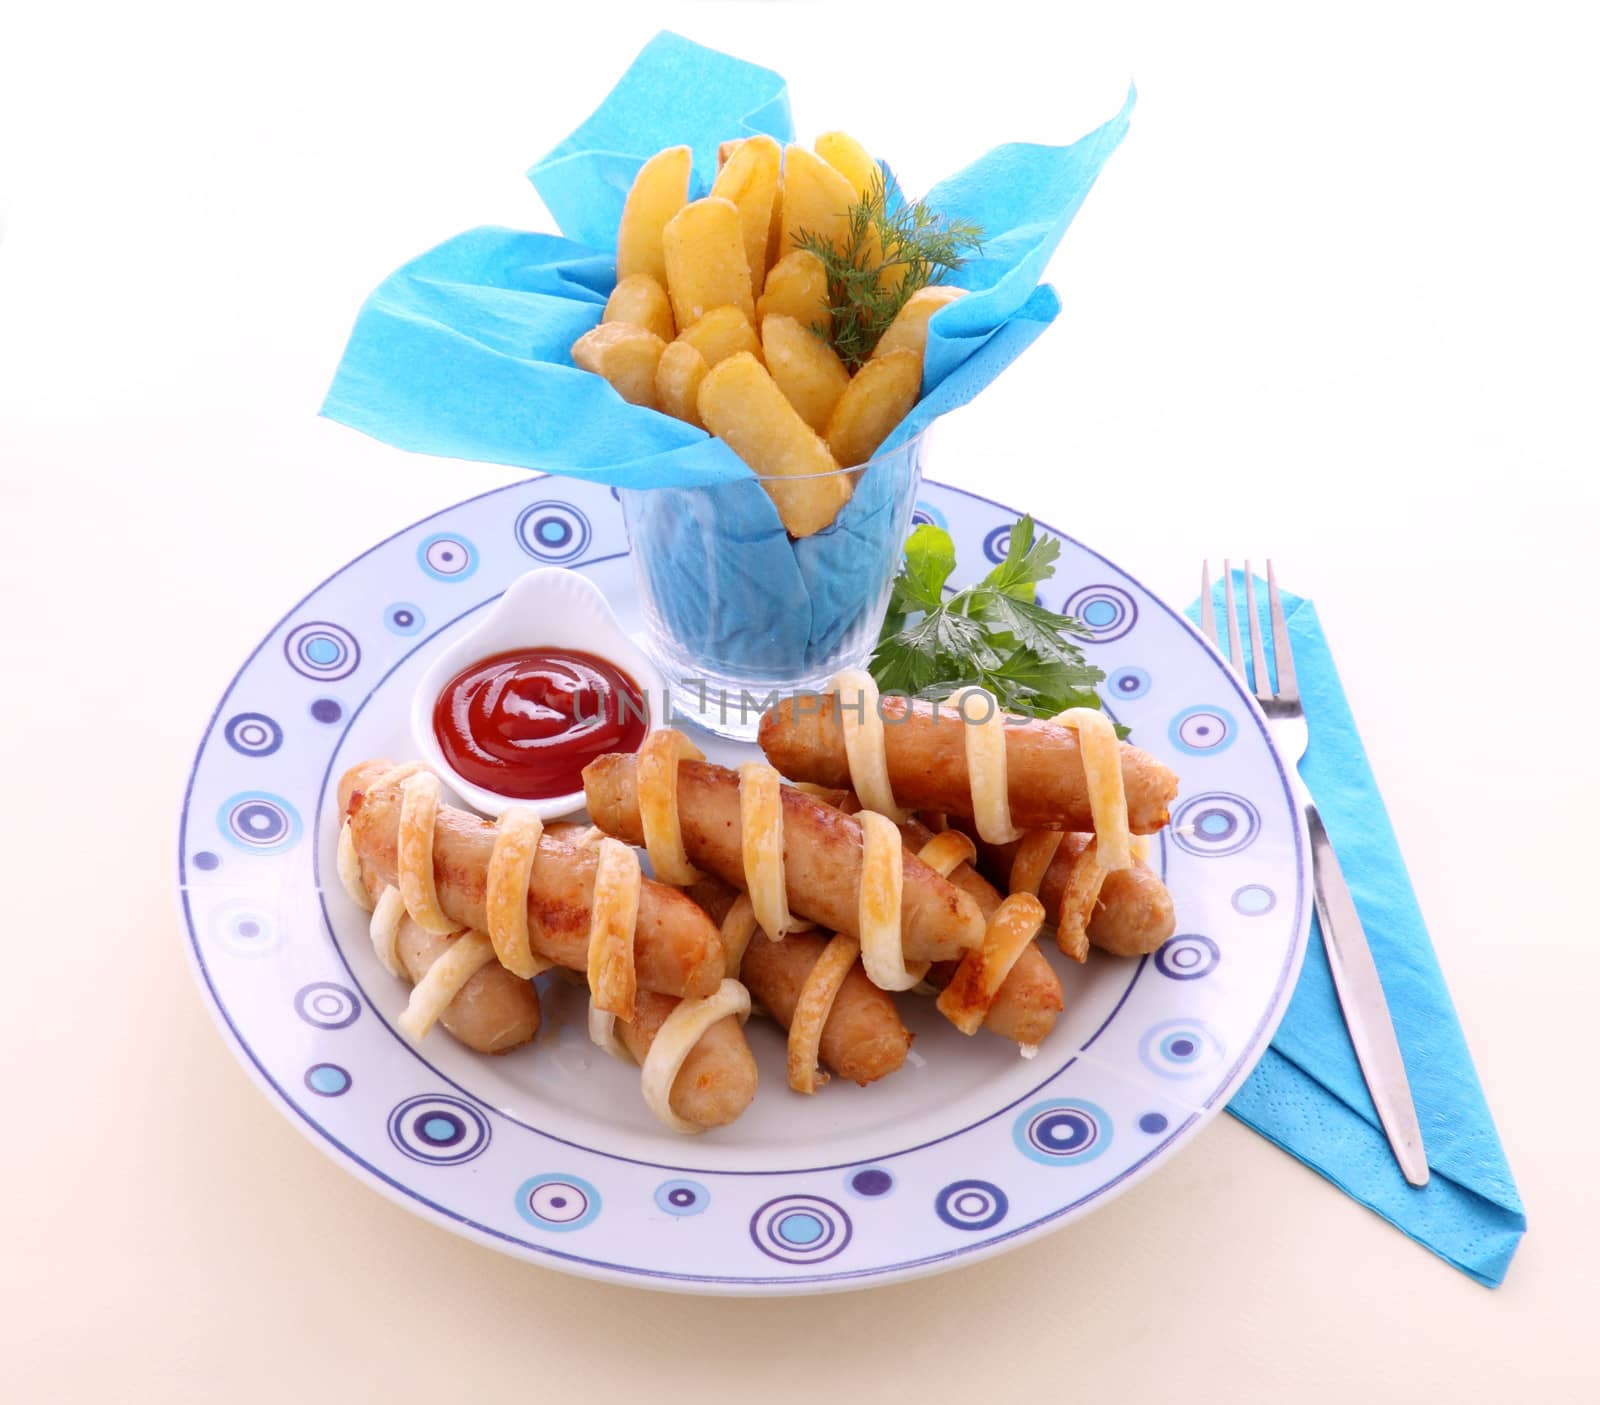 Twisted pastry around chicken sausages with fries and ketchup.